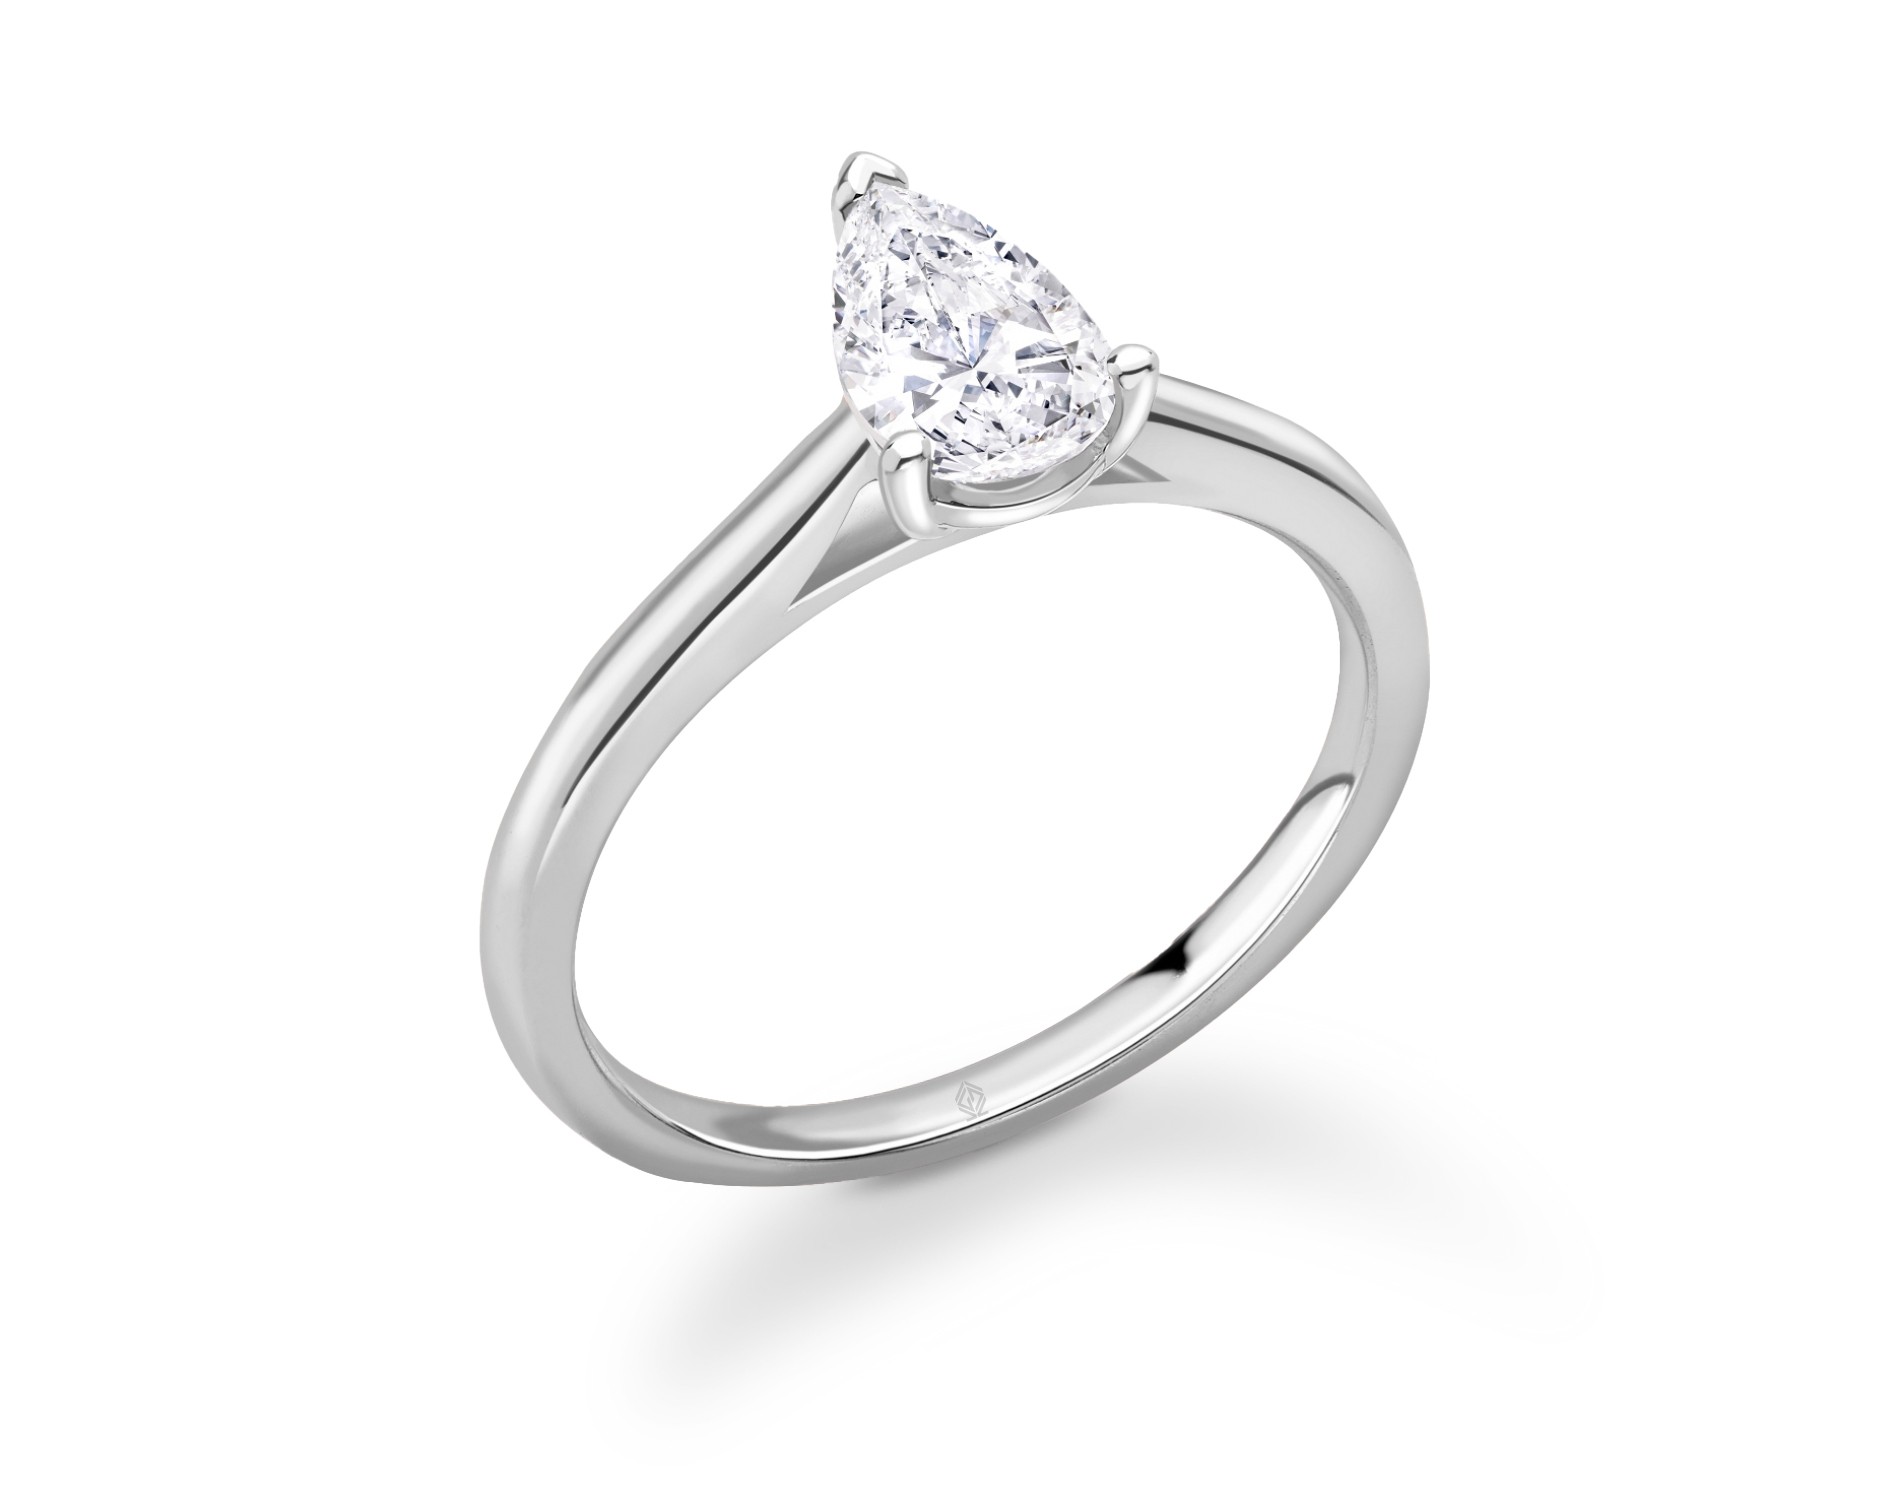 18K WHITE GOLD PEAR CUT SOLITAIRE DIAMOND ENGAGEMENT RING